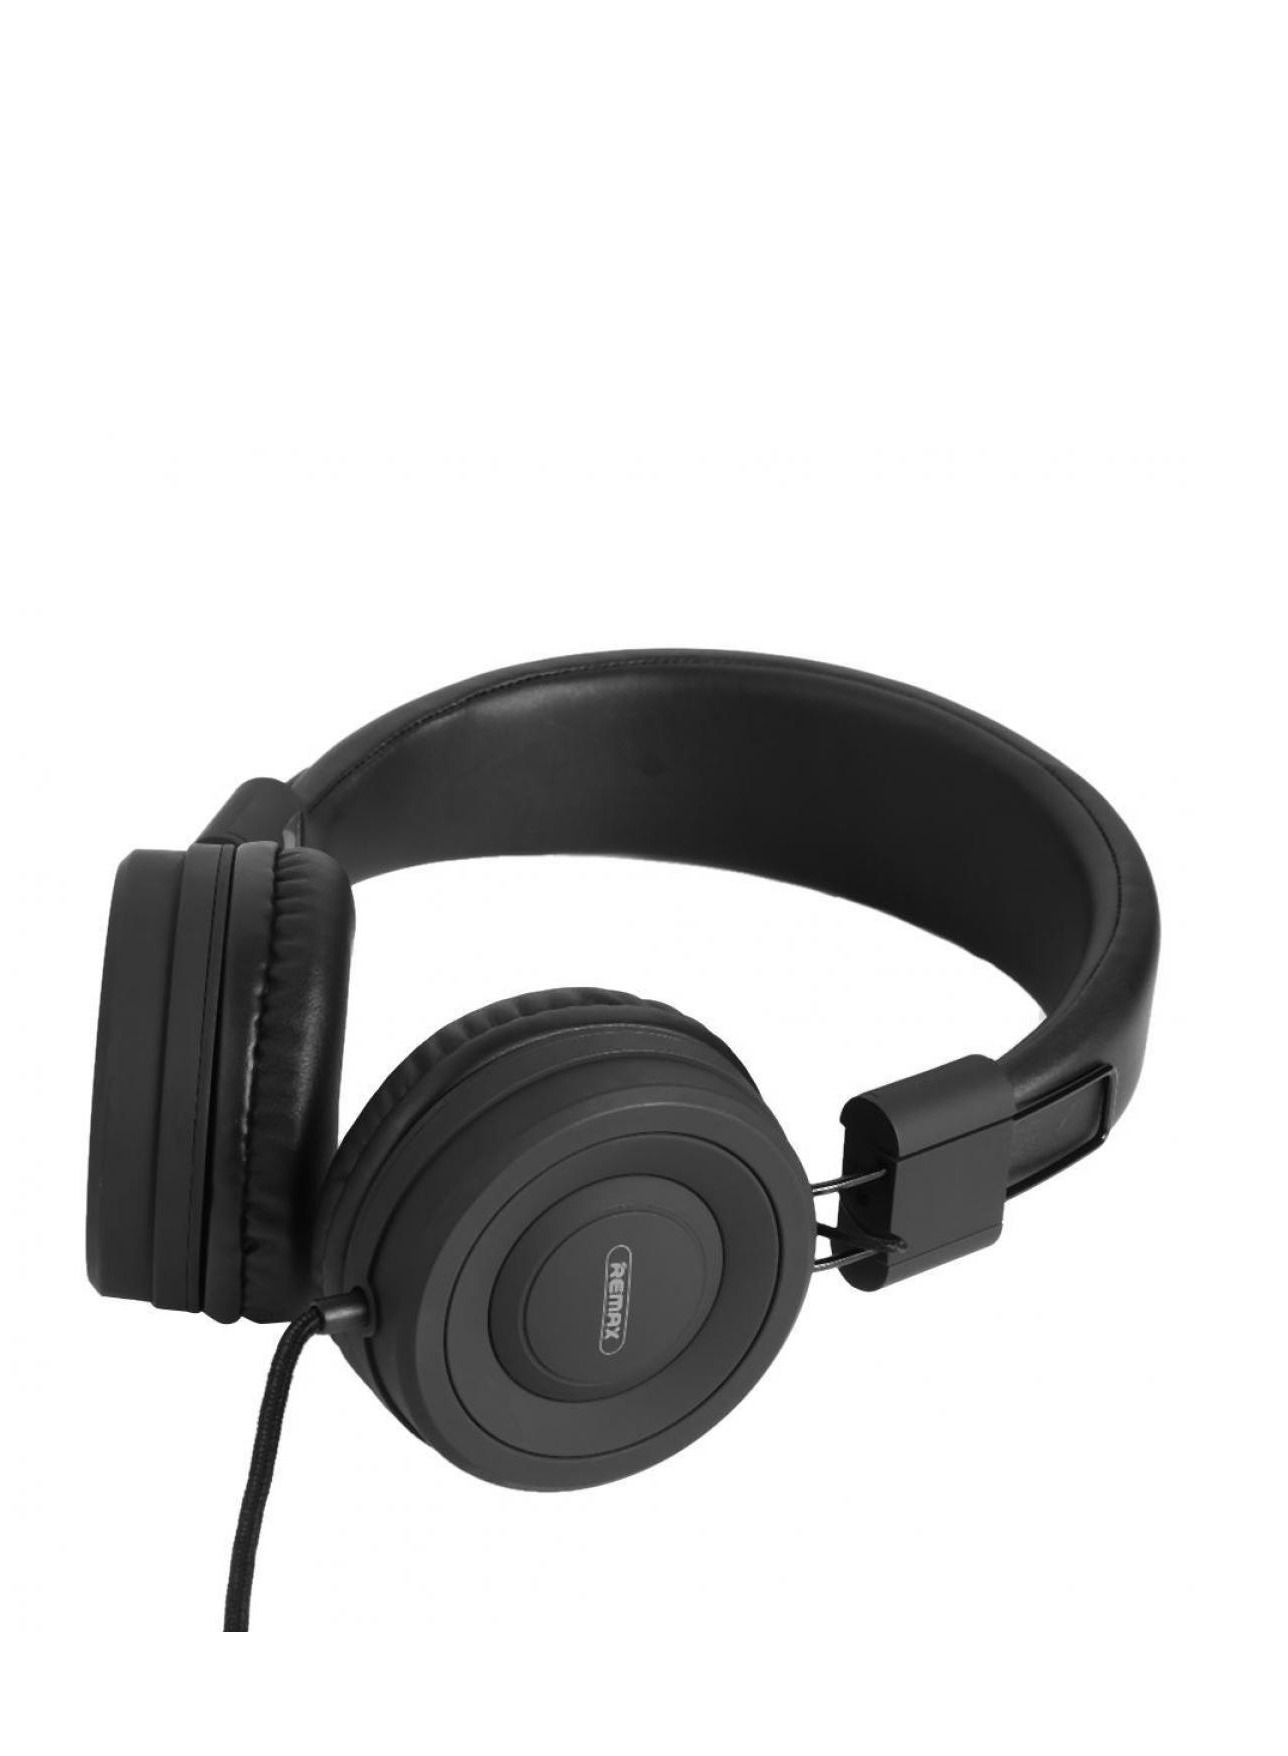 Remax Over-Ear Wired Headphones, Black- RM-805